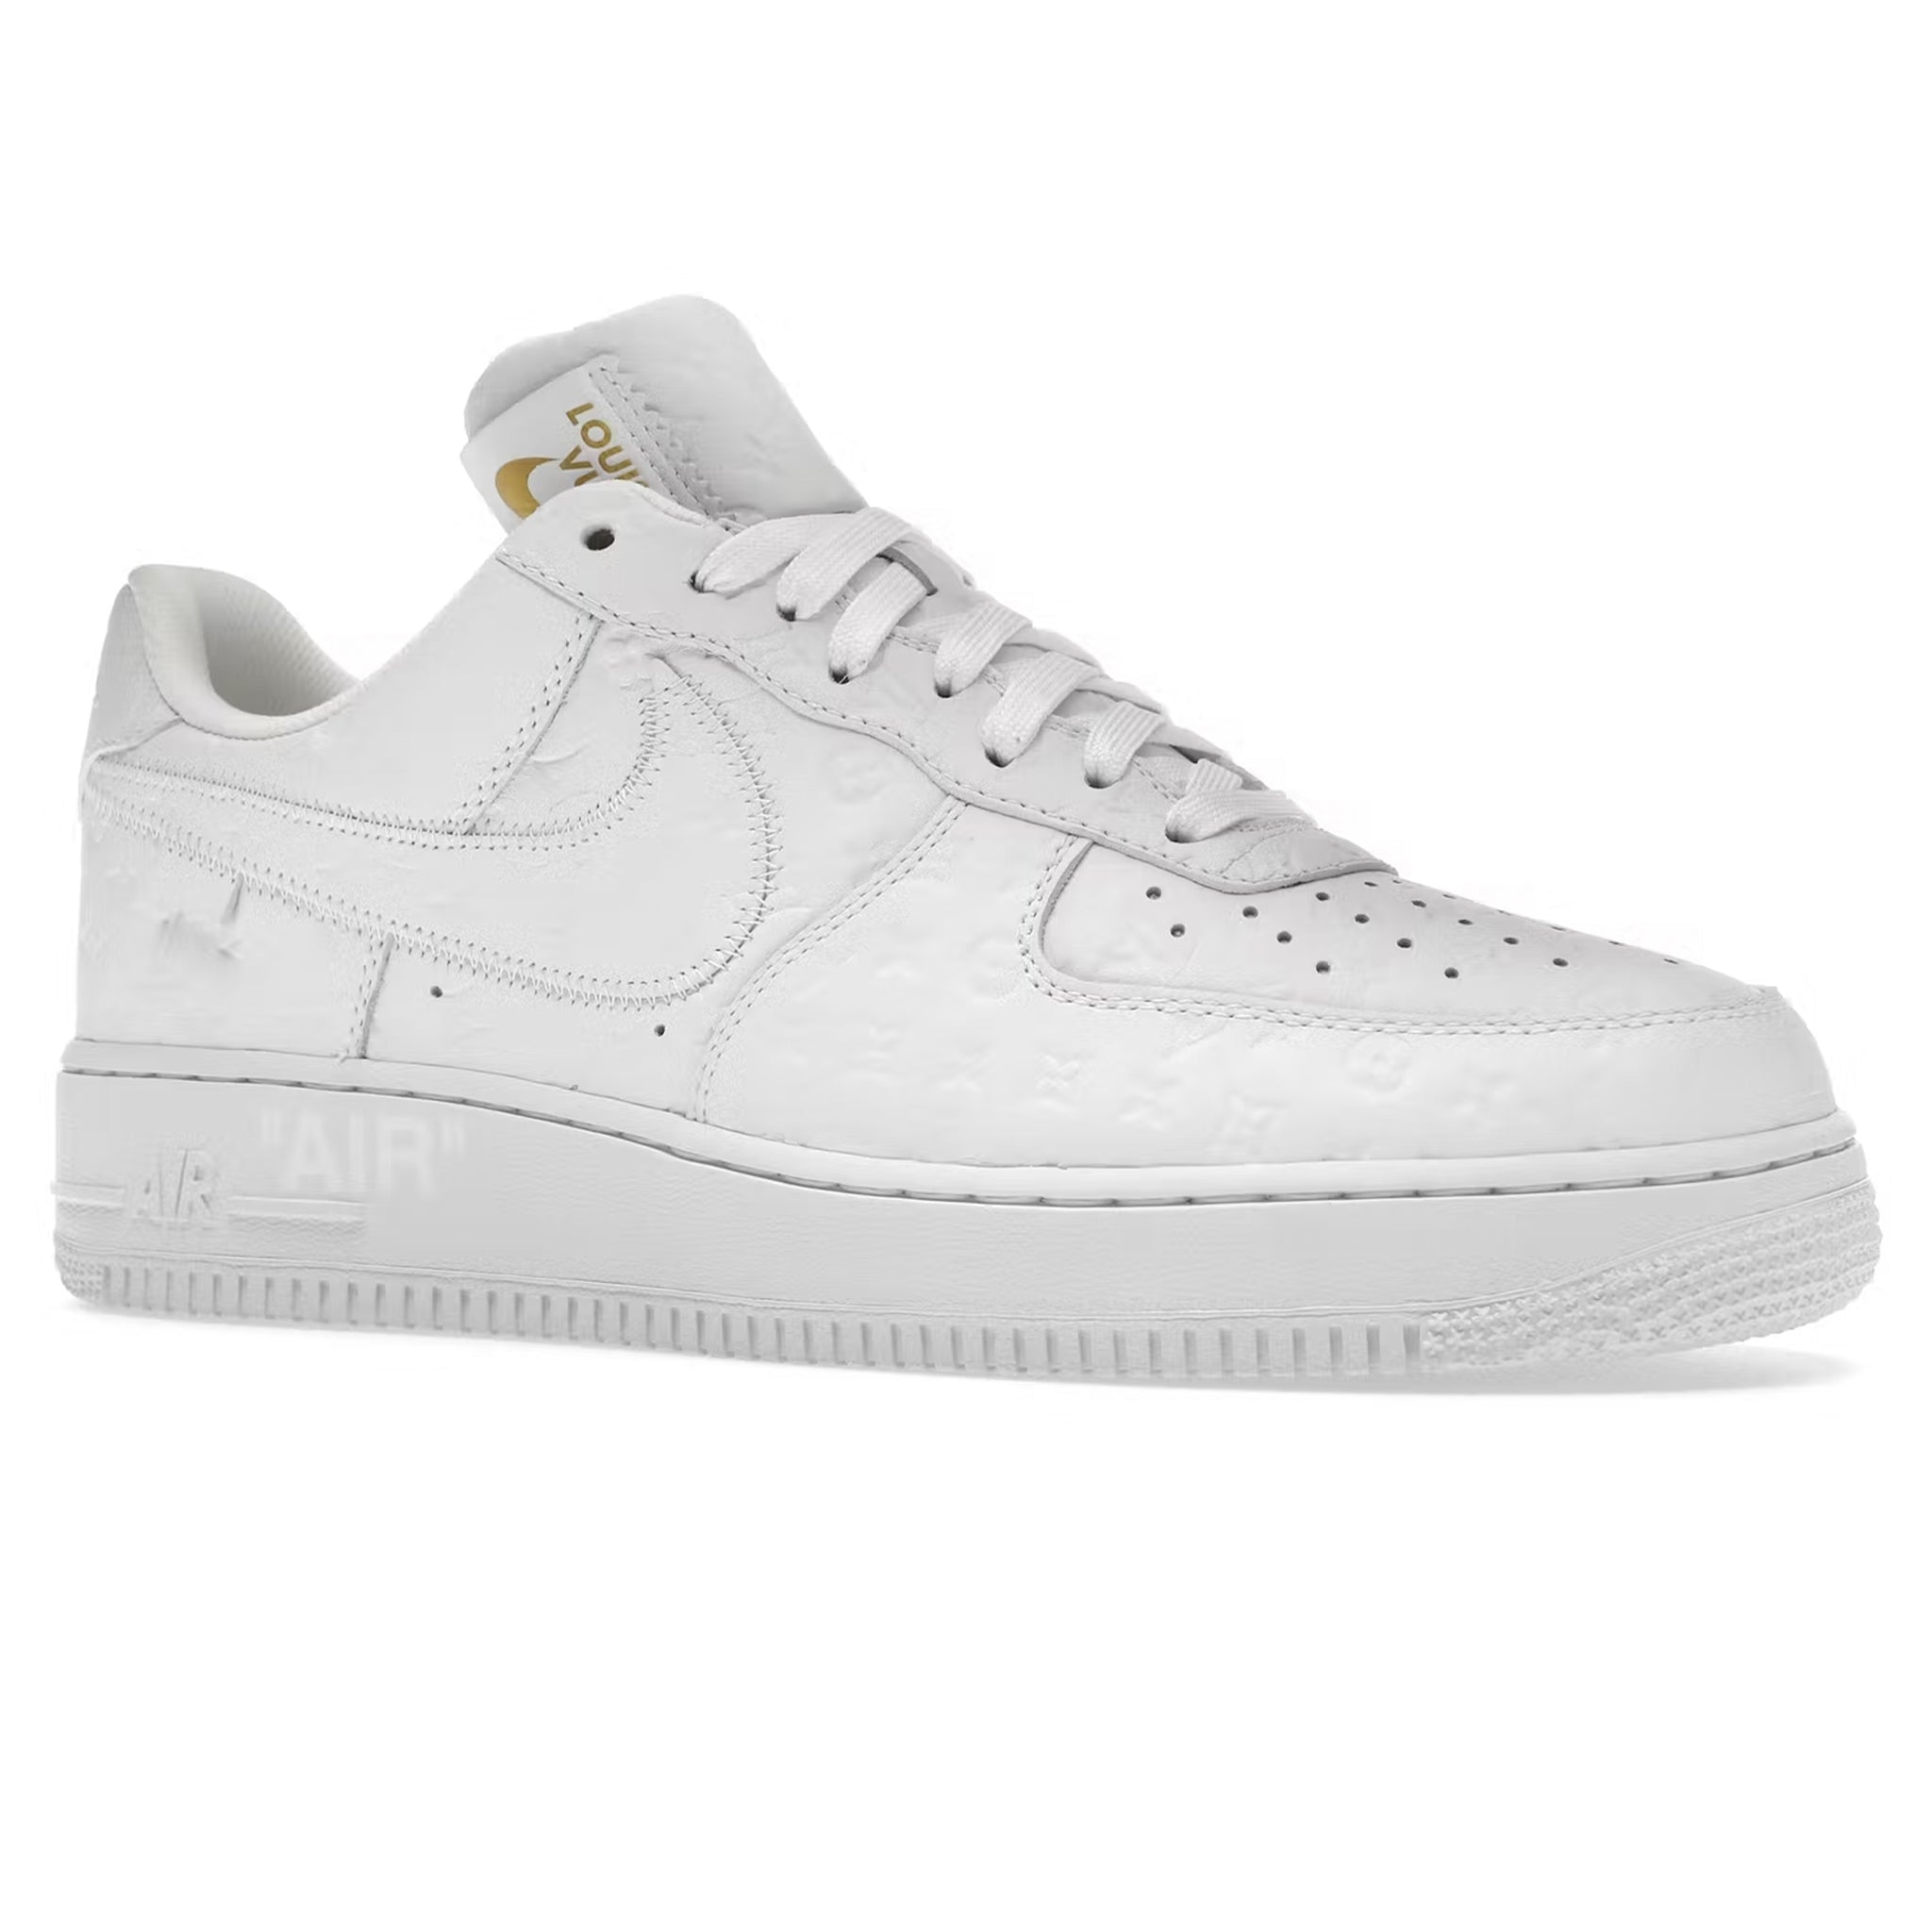 Image of Louis Vuitton x Nike Air Force 1 Low White